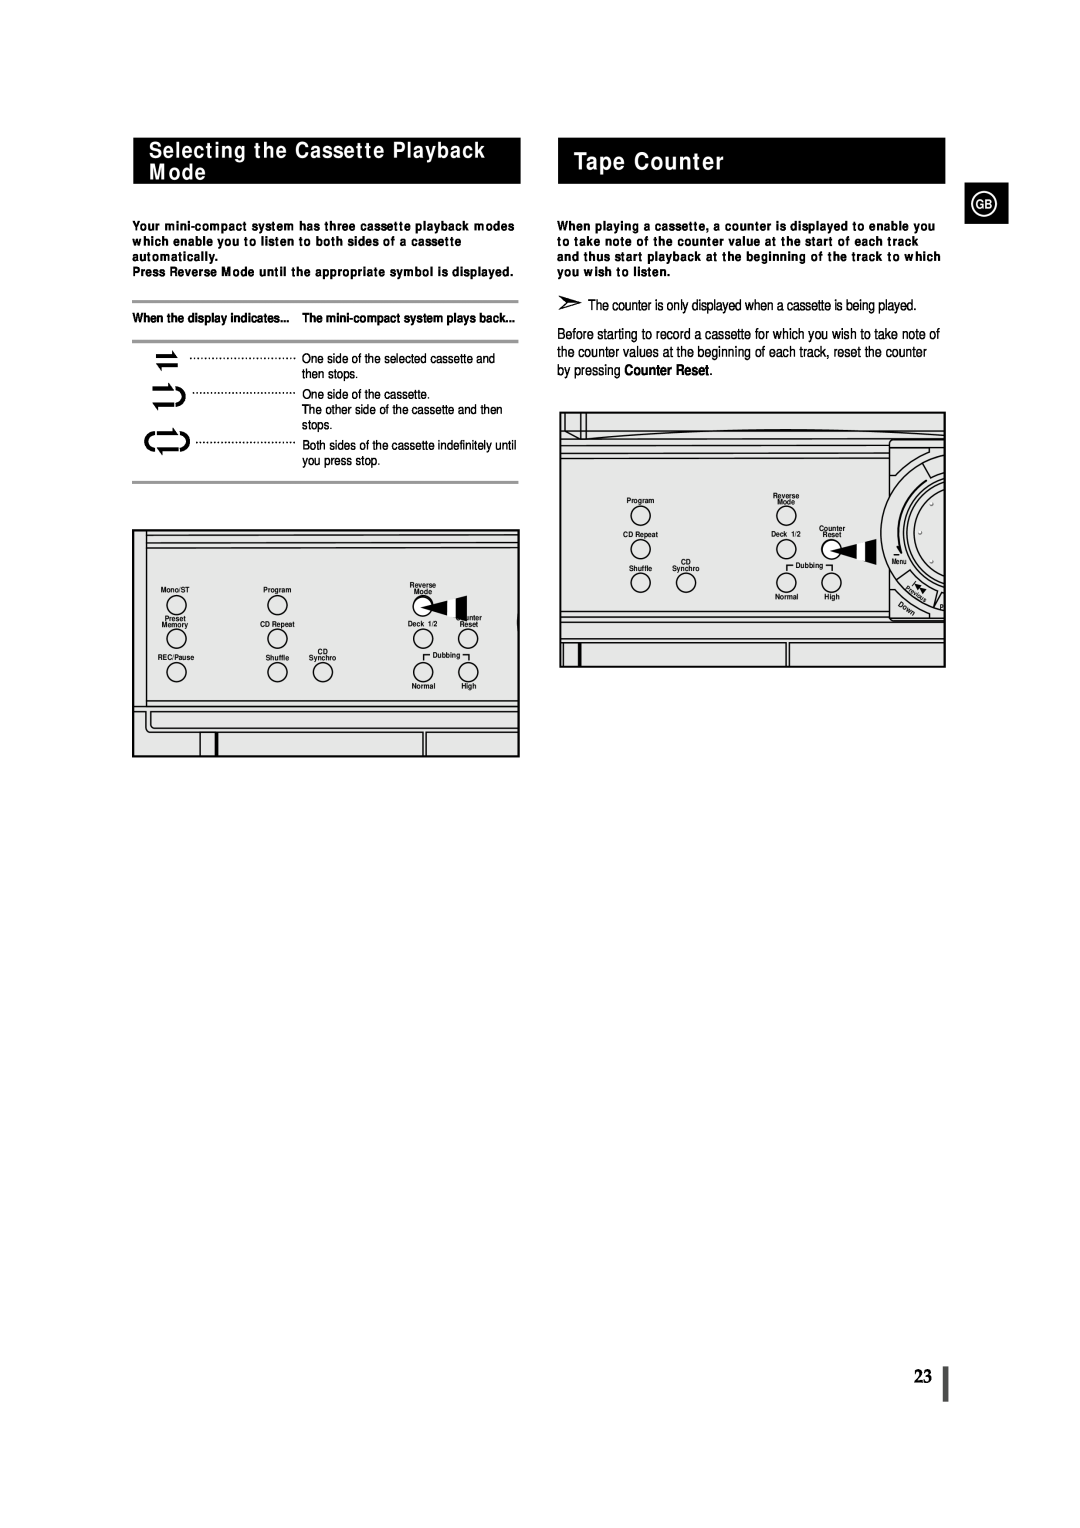 Samsung MAX-VL85 instruction manual Tape Counter, Selecting the Cassette Playback Mode 